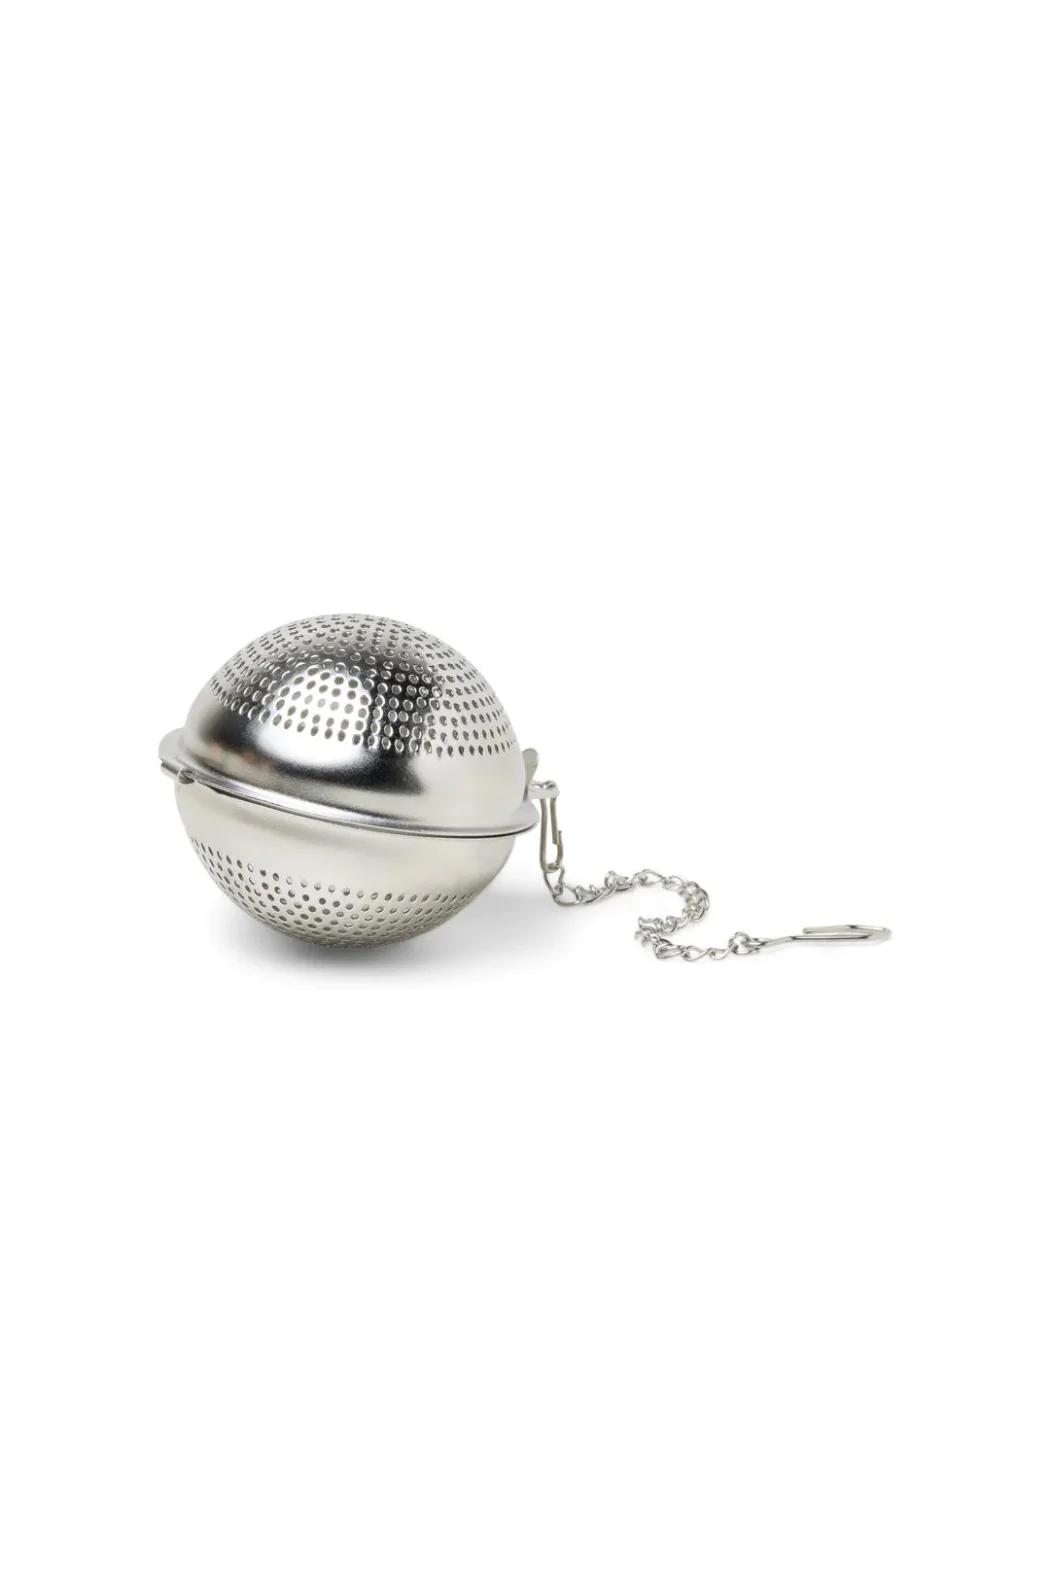 Product Image for Stainless Steel Infuser, Small